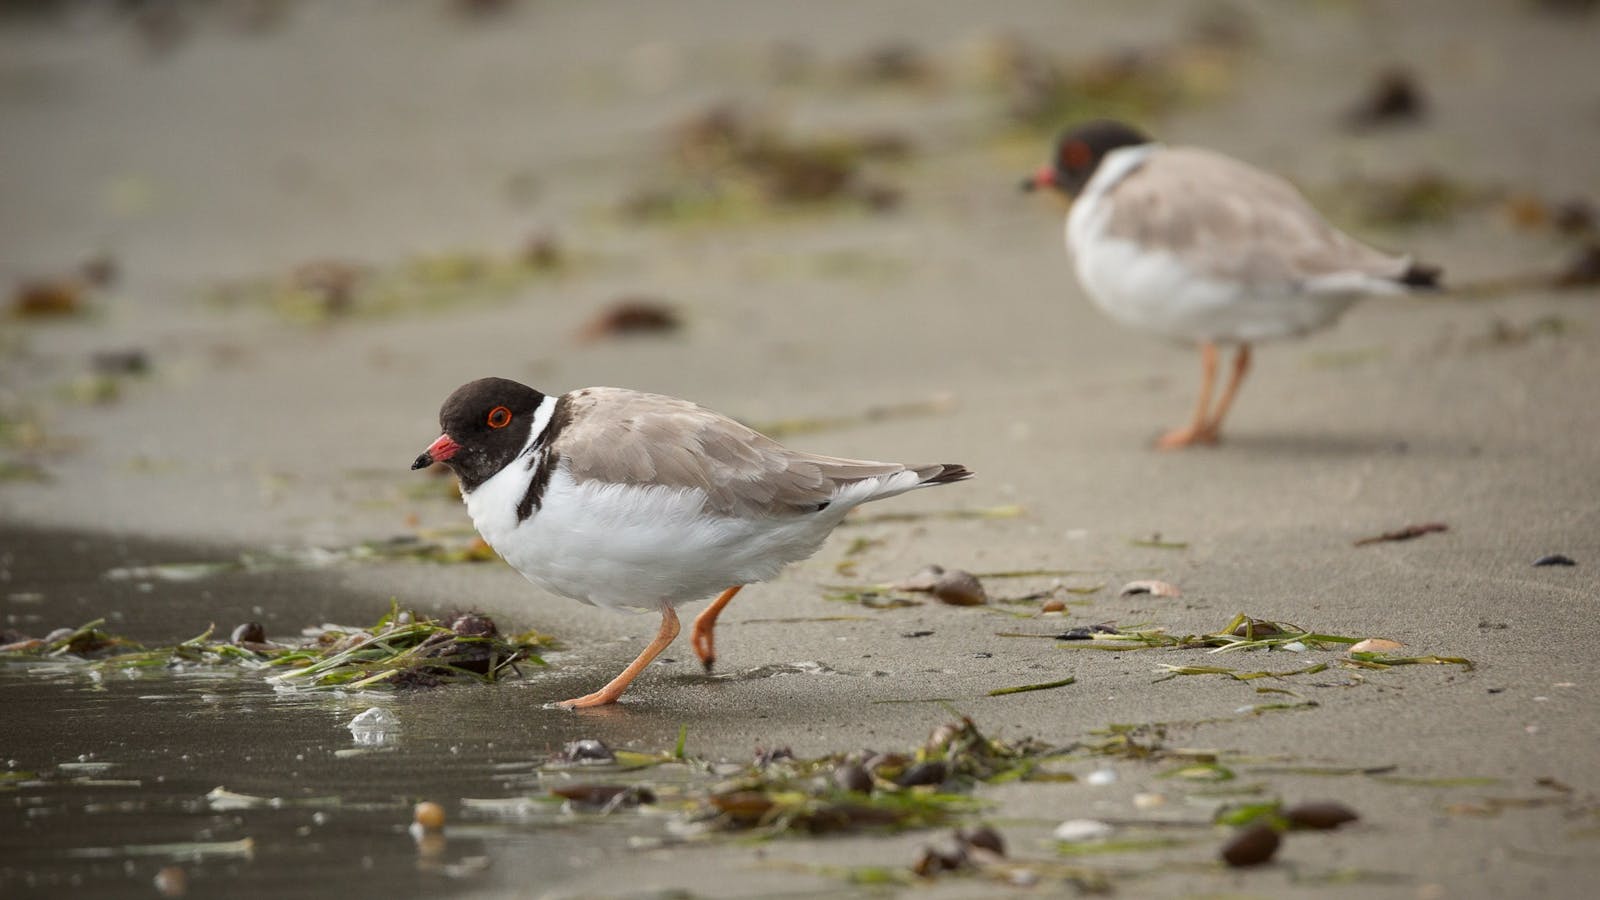 Hooded Plovers ... Bird photographers will love the diversity of birdlife to photograph.